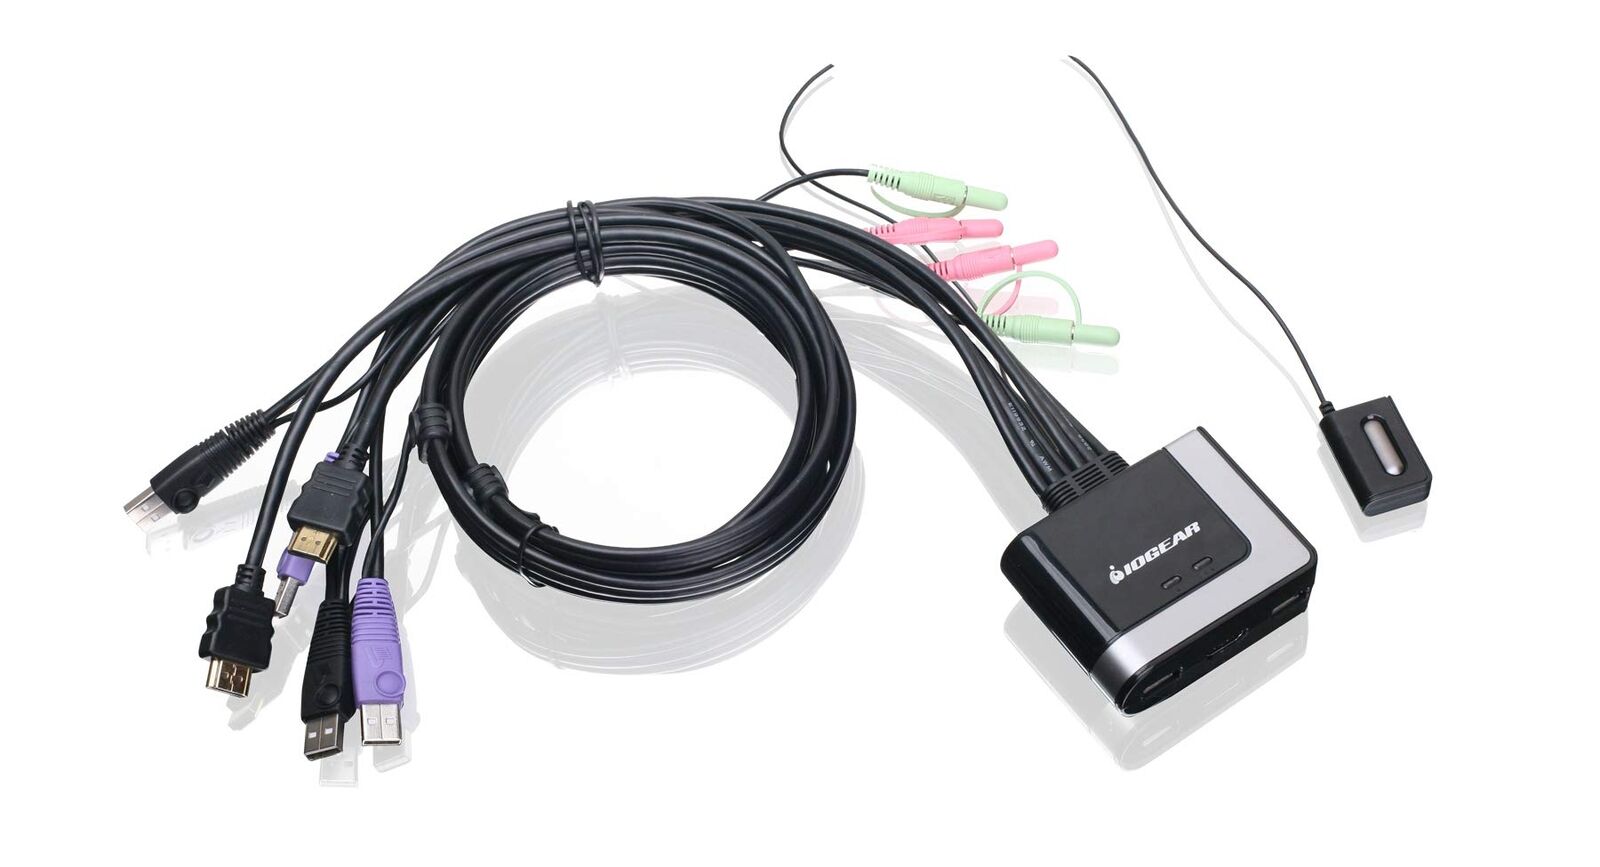 2-Port USB HDMI Cabled KVM Switch - 1920 x 1200 60Hz - Hotkey or Remote Butto...